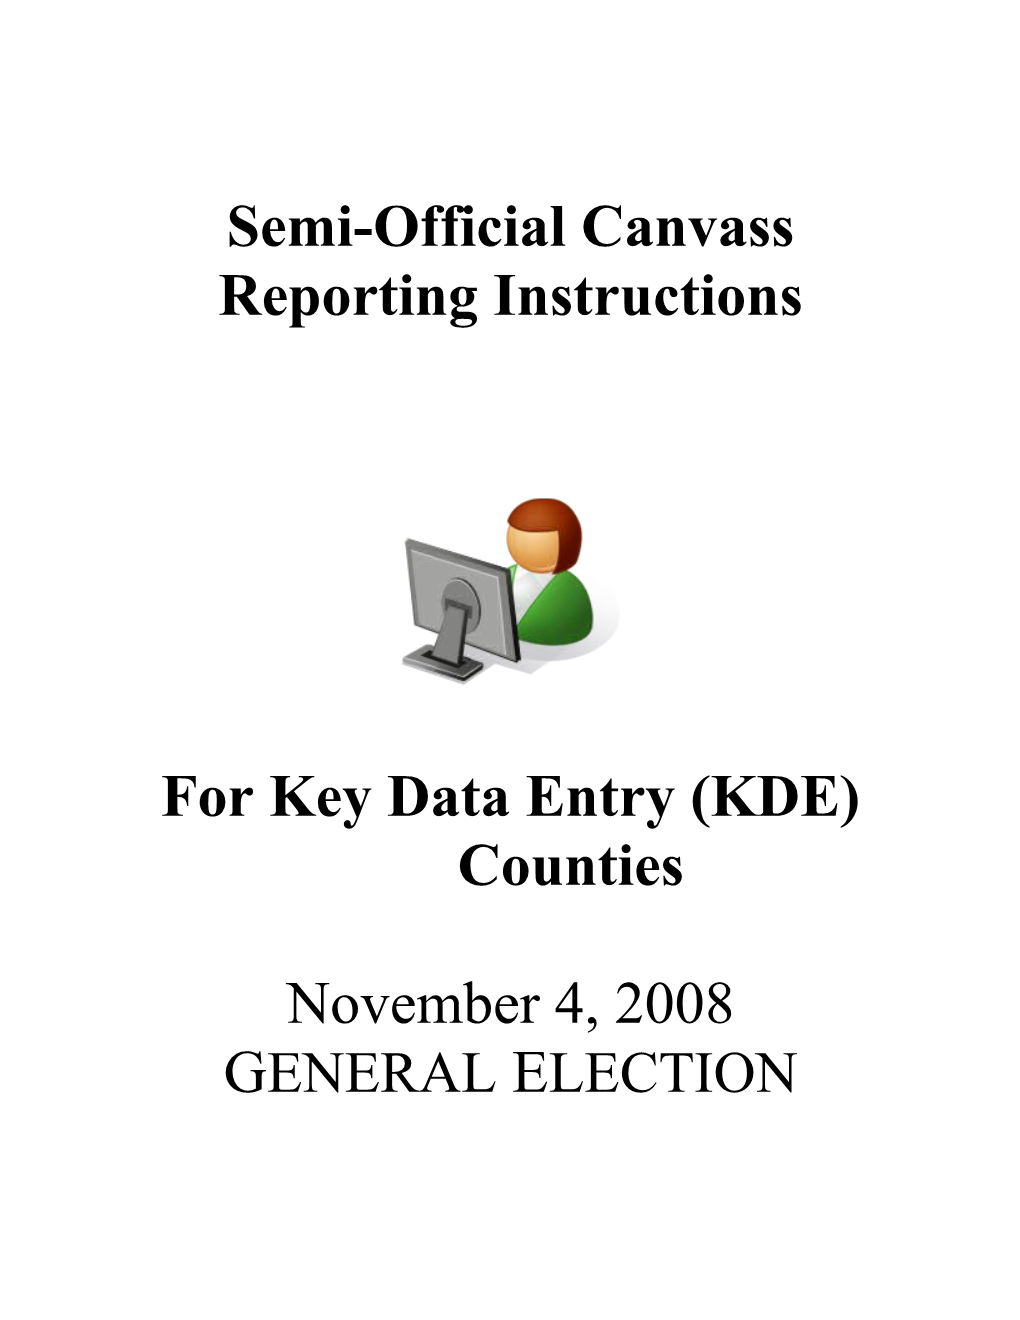 Phone Number to Use for the November 3, 1998 General Election